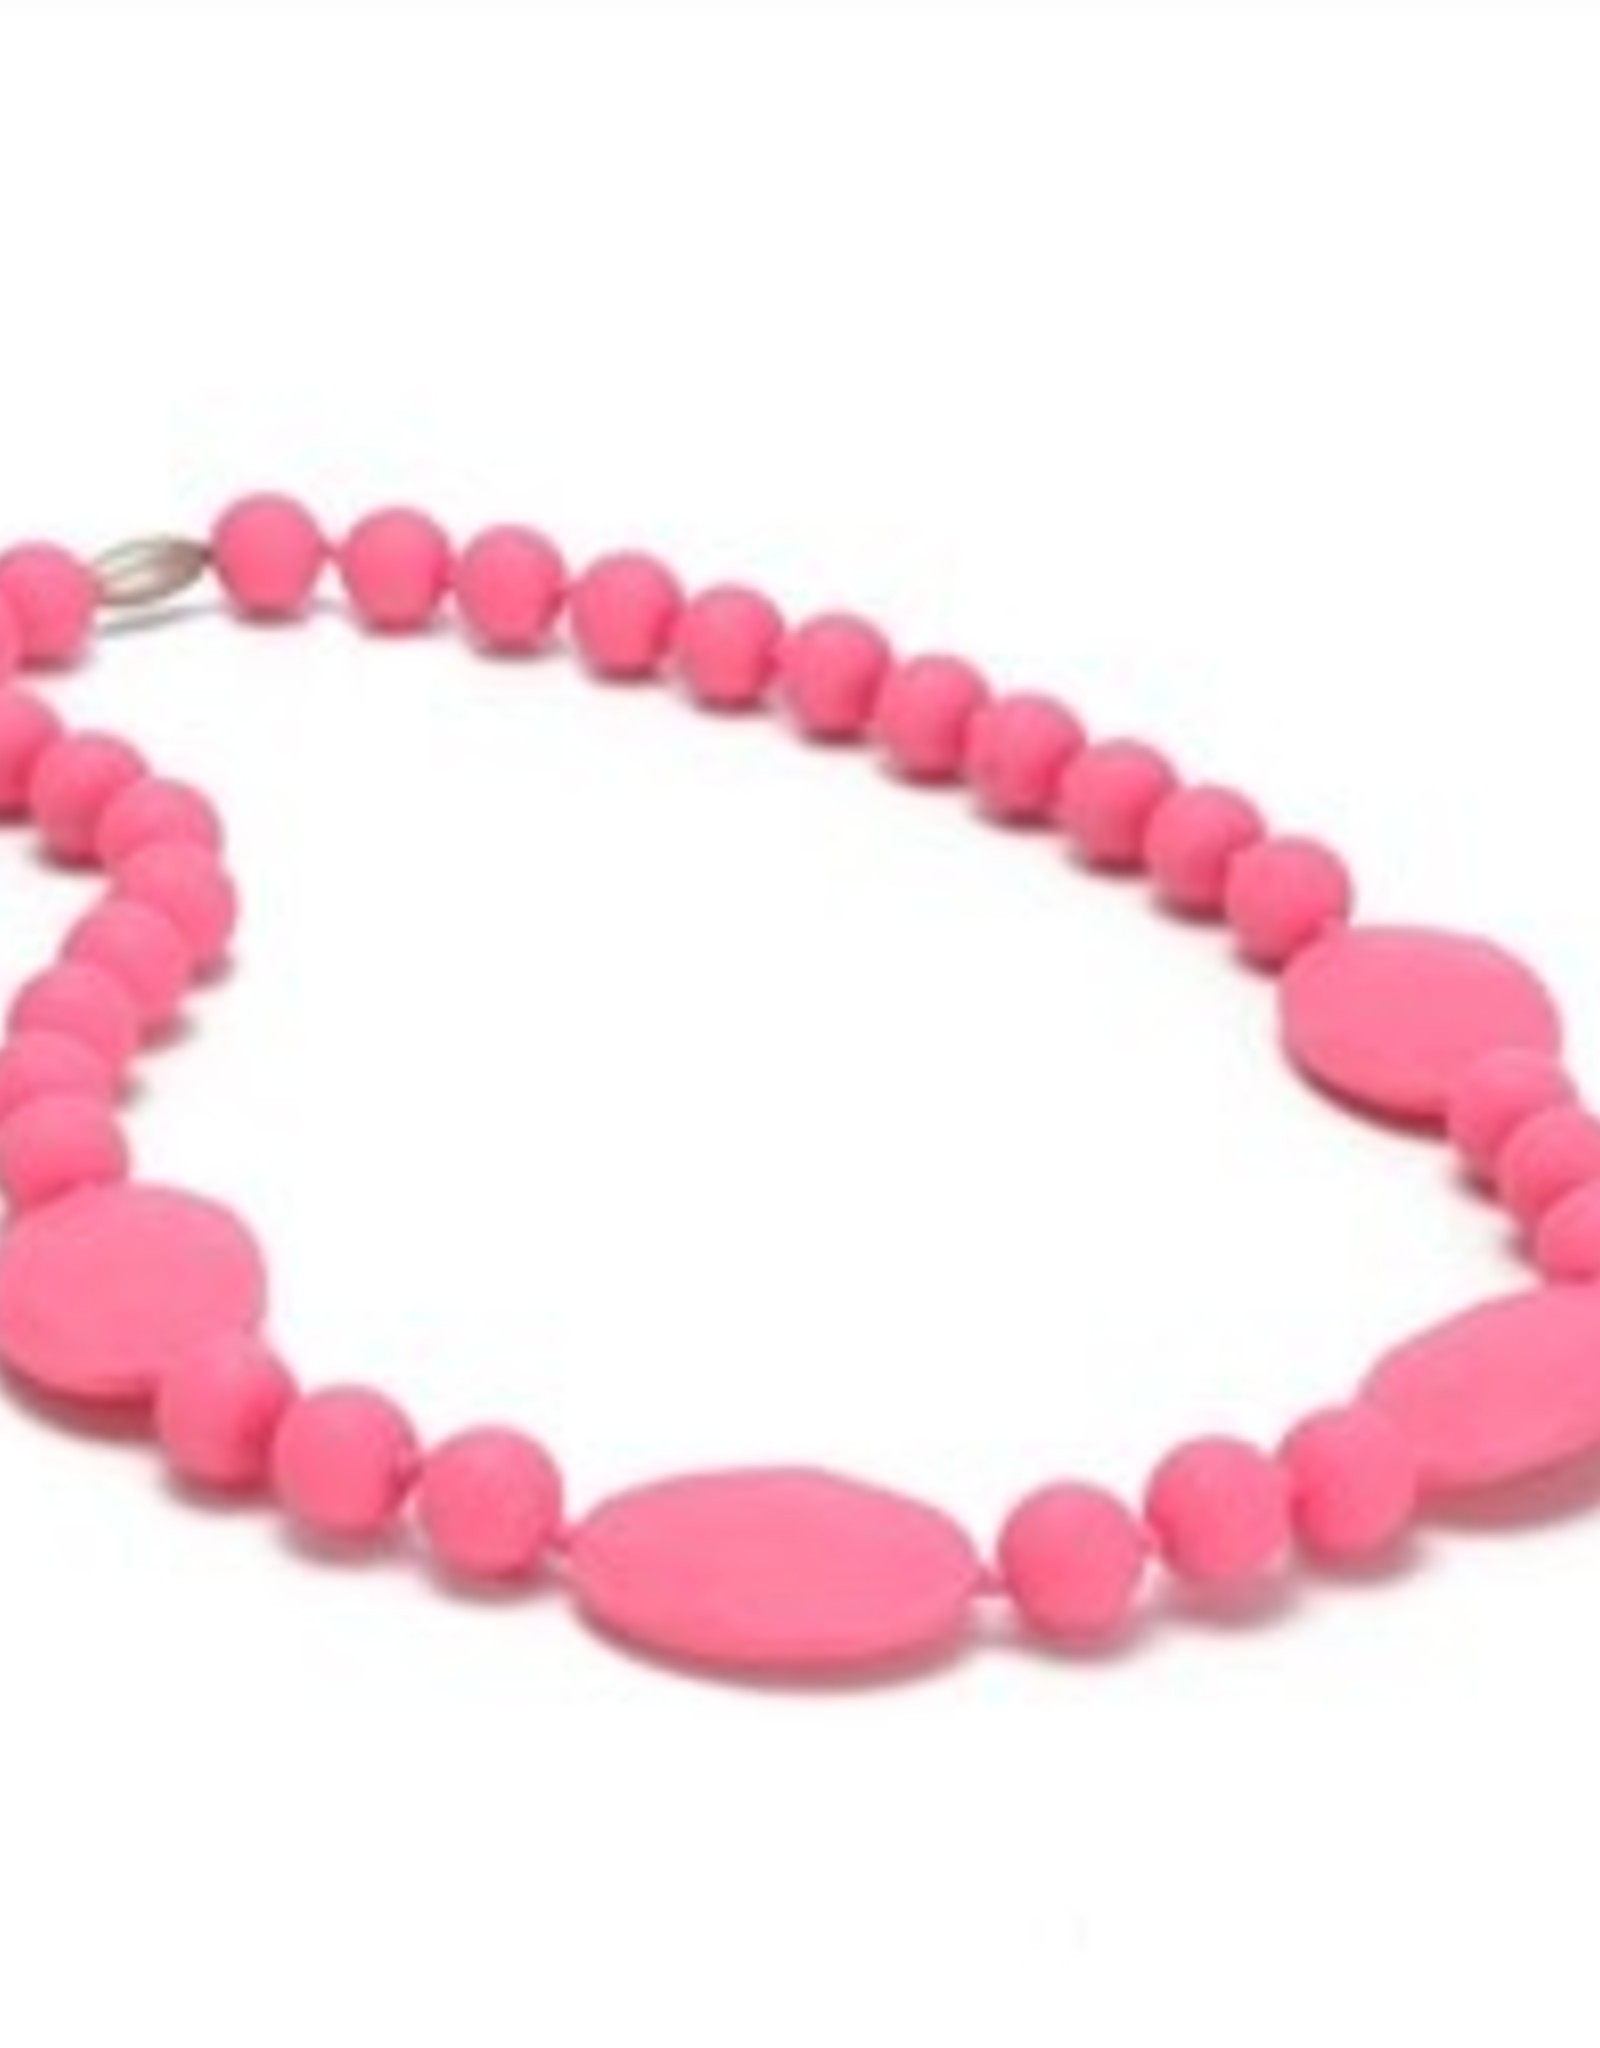 Chewbeads Perry Teething Necklace in Punchy Pink